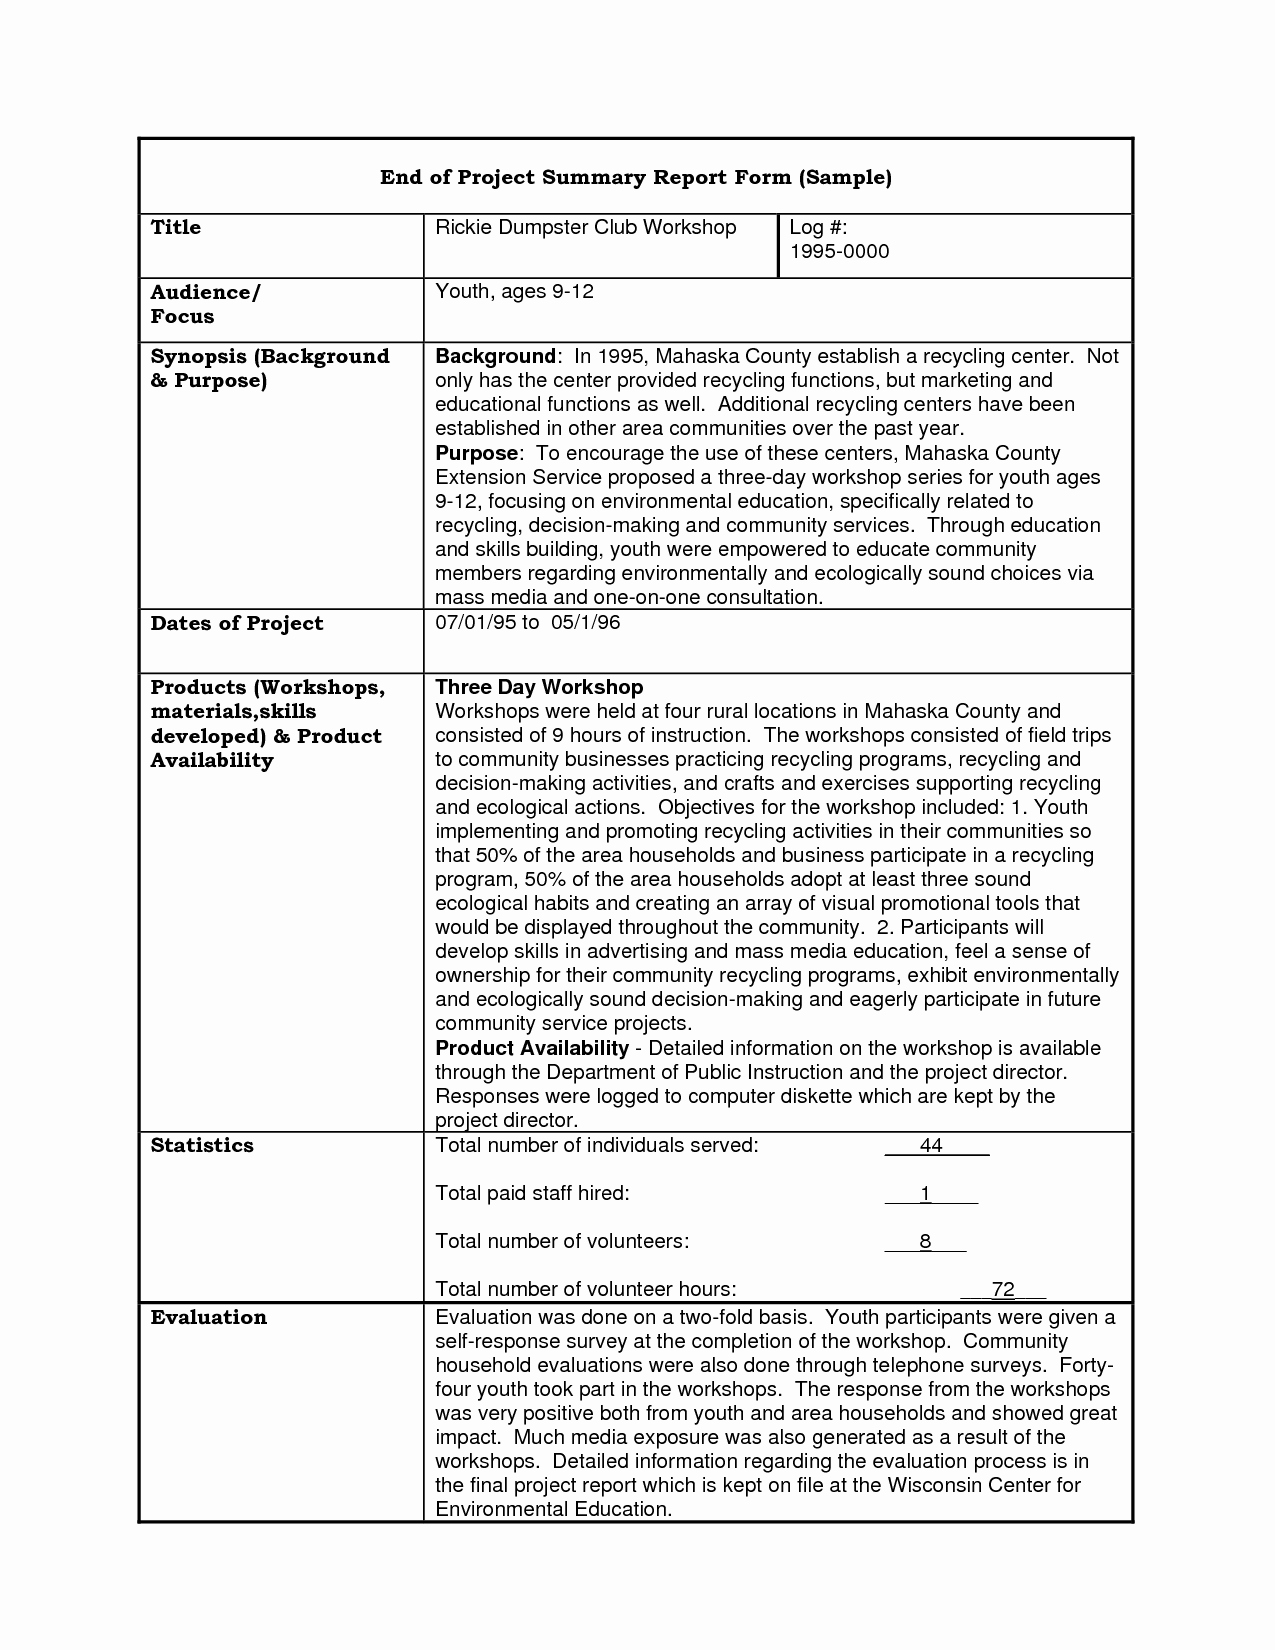 Project Executive Summary Template Word Fresh Executive Summary Template Example Mughals Project Word